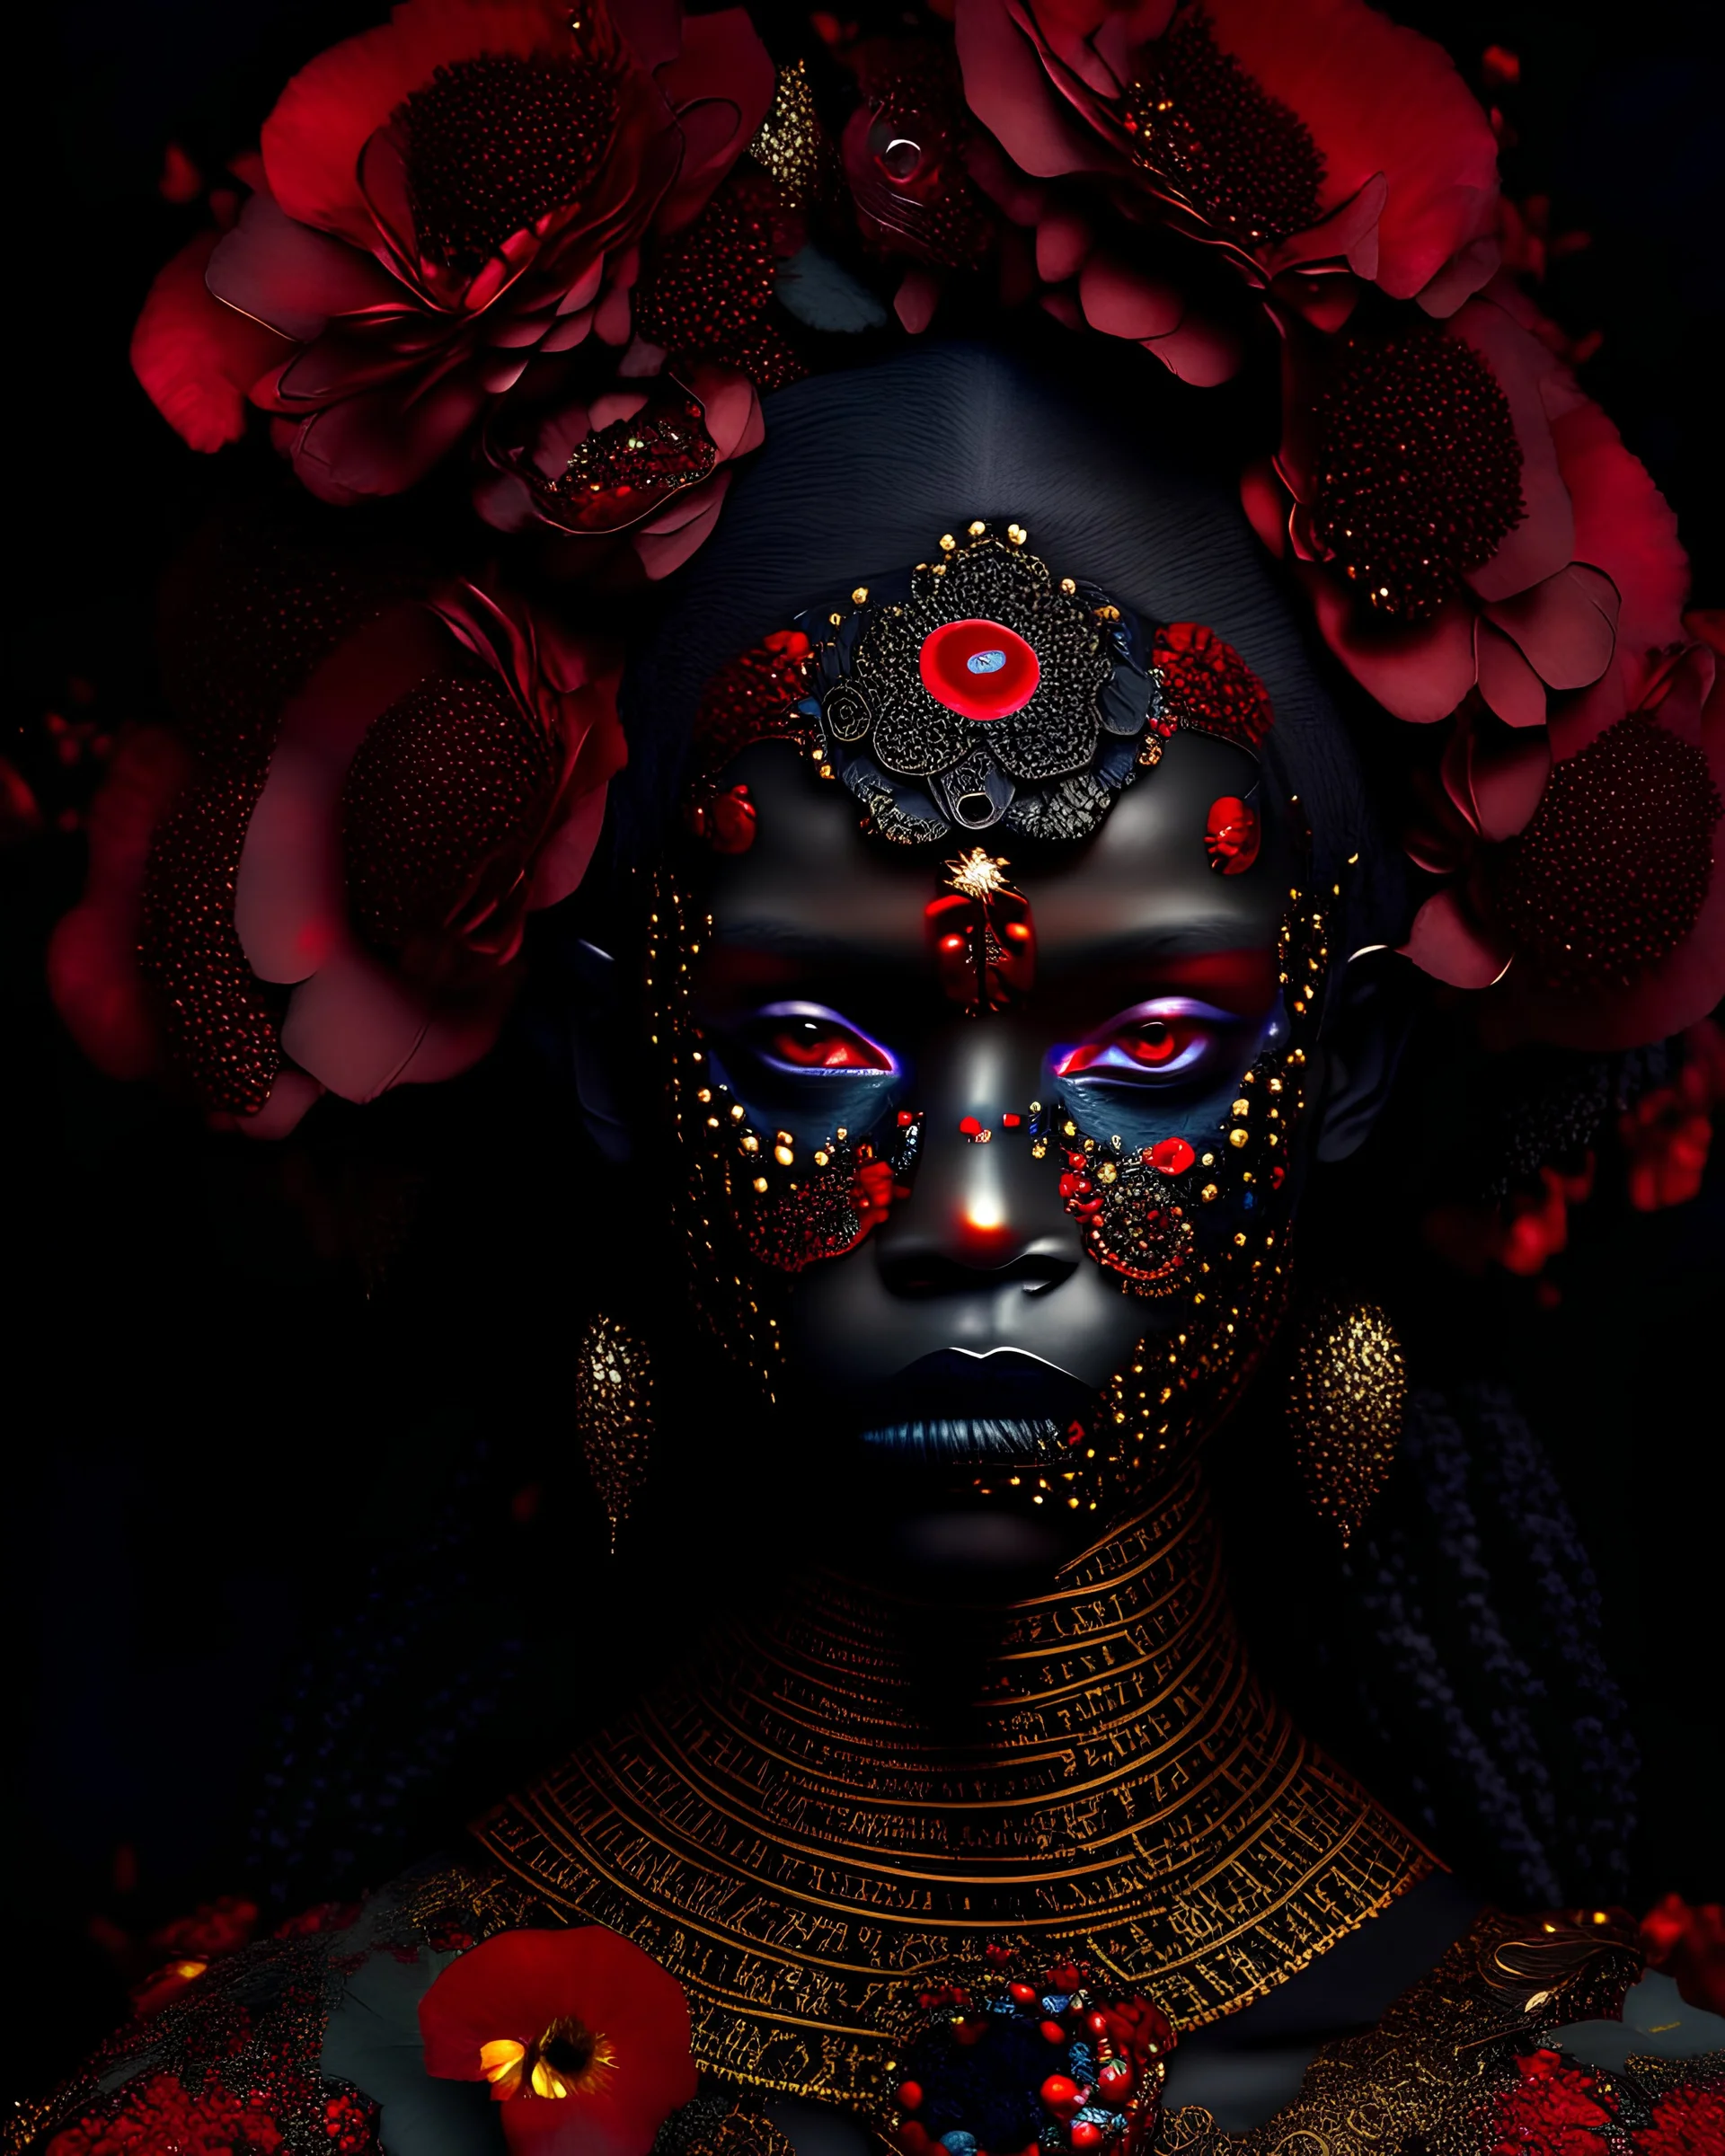 Beautiful young faced african voodoo vantablack woman adorned with garden red qnd ginger . Pansy flower rcoco venetian metallic filigree decadent samanism garden pasi rhinesstone covered floral headress ornated woman portrait wearing venetian face masque and floral filigree embossed dress vantablack gothica voidcore decadent organic bio spinal ribbed detail of ribbed mineral stones extremely detailed hyperrealistic maximálist concept art rococo portrait art